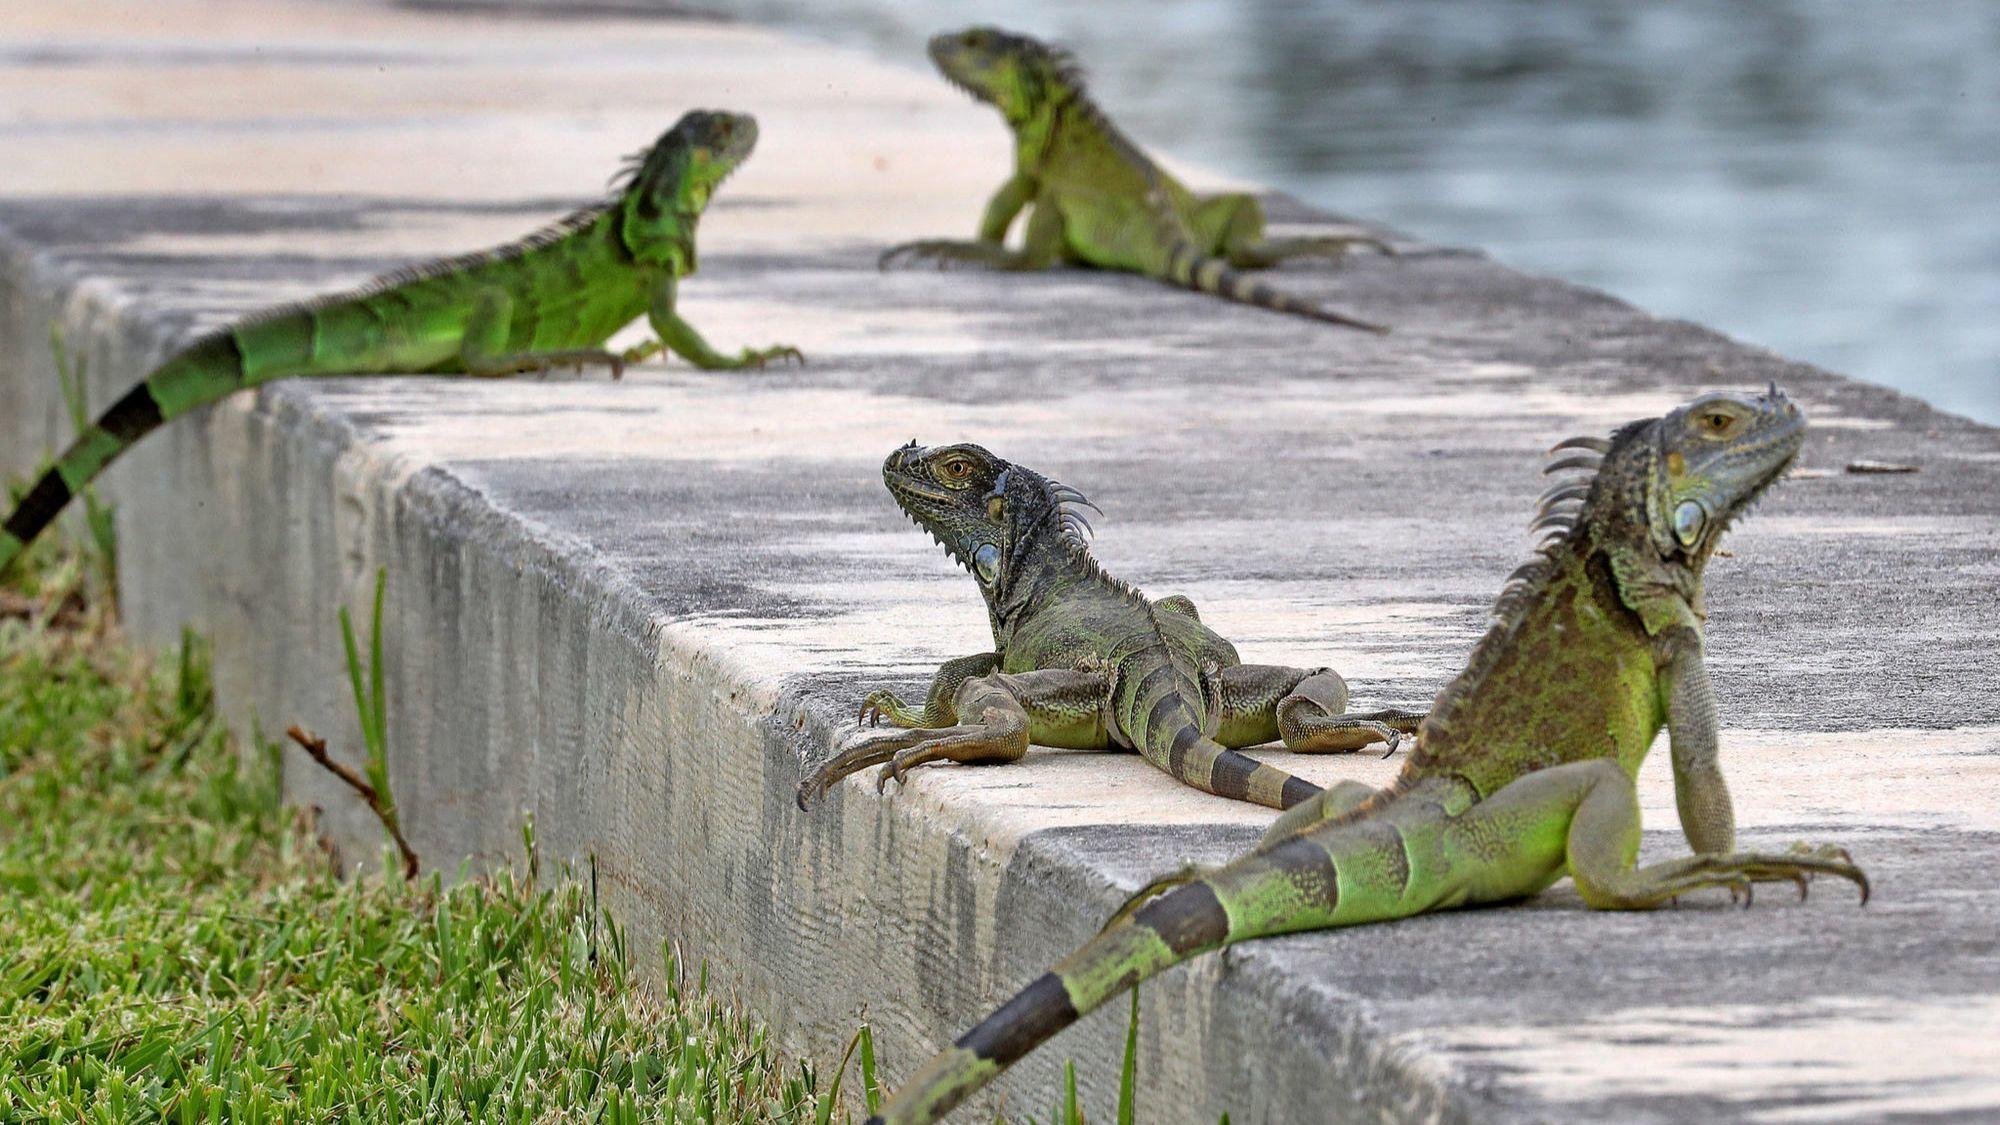 Out of control iguanas infesting South Florida - Orlando Sentinel2000 x 1125